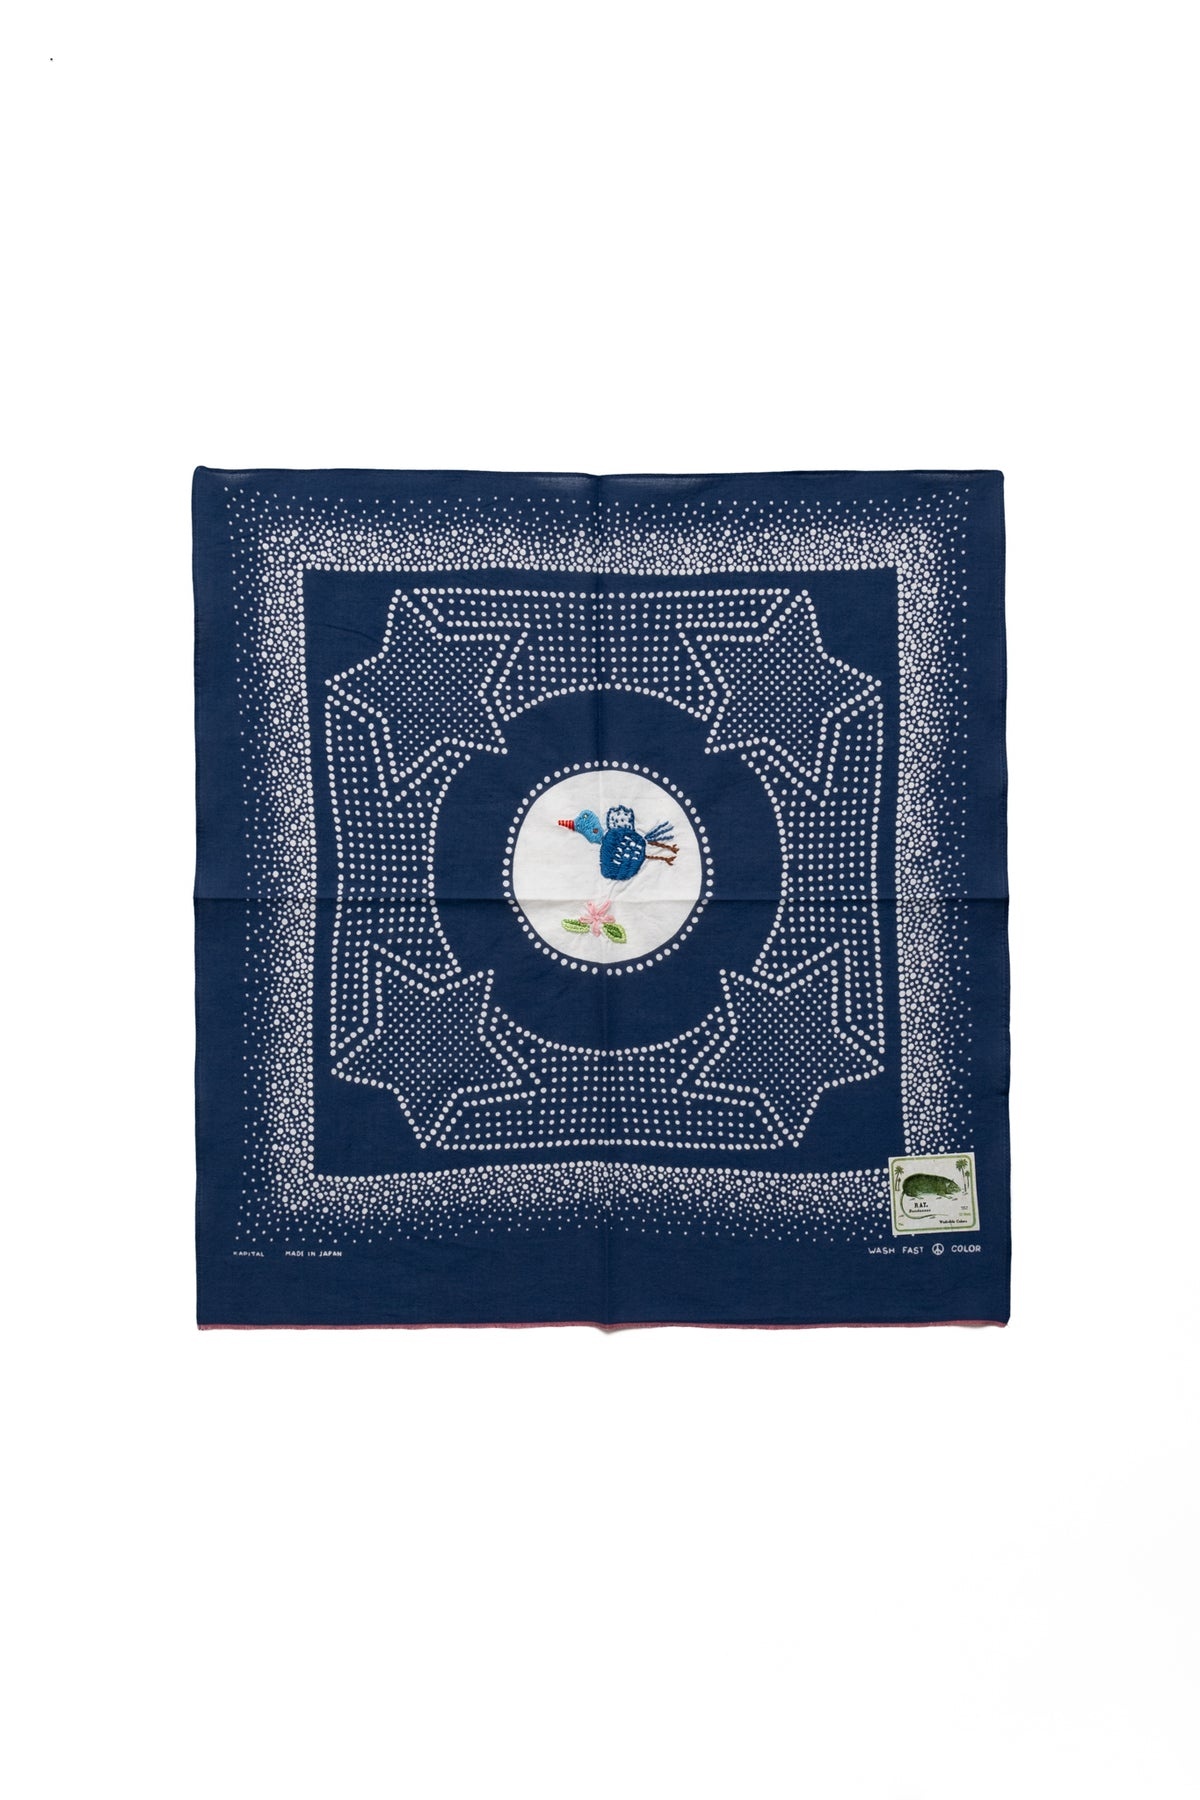 Fastcolor Selvedge Bandana (MAGPIE Embroidery) - 2